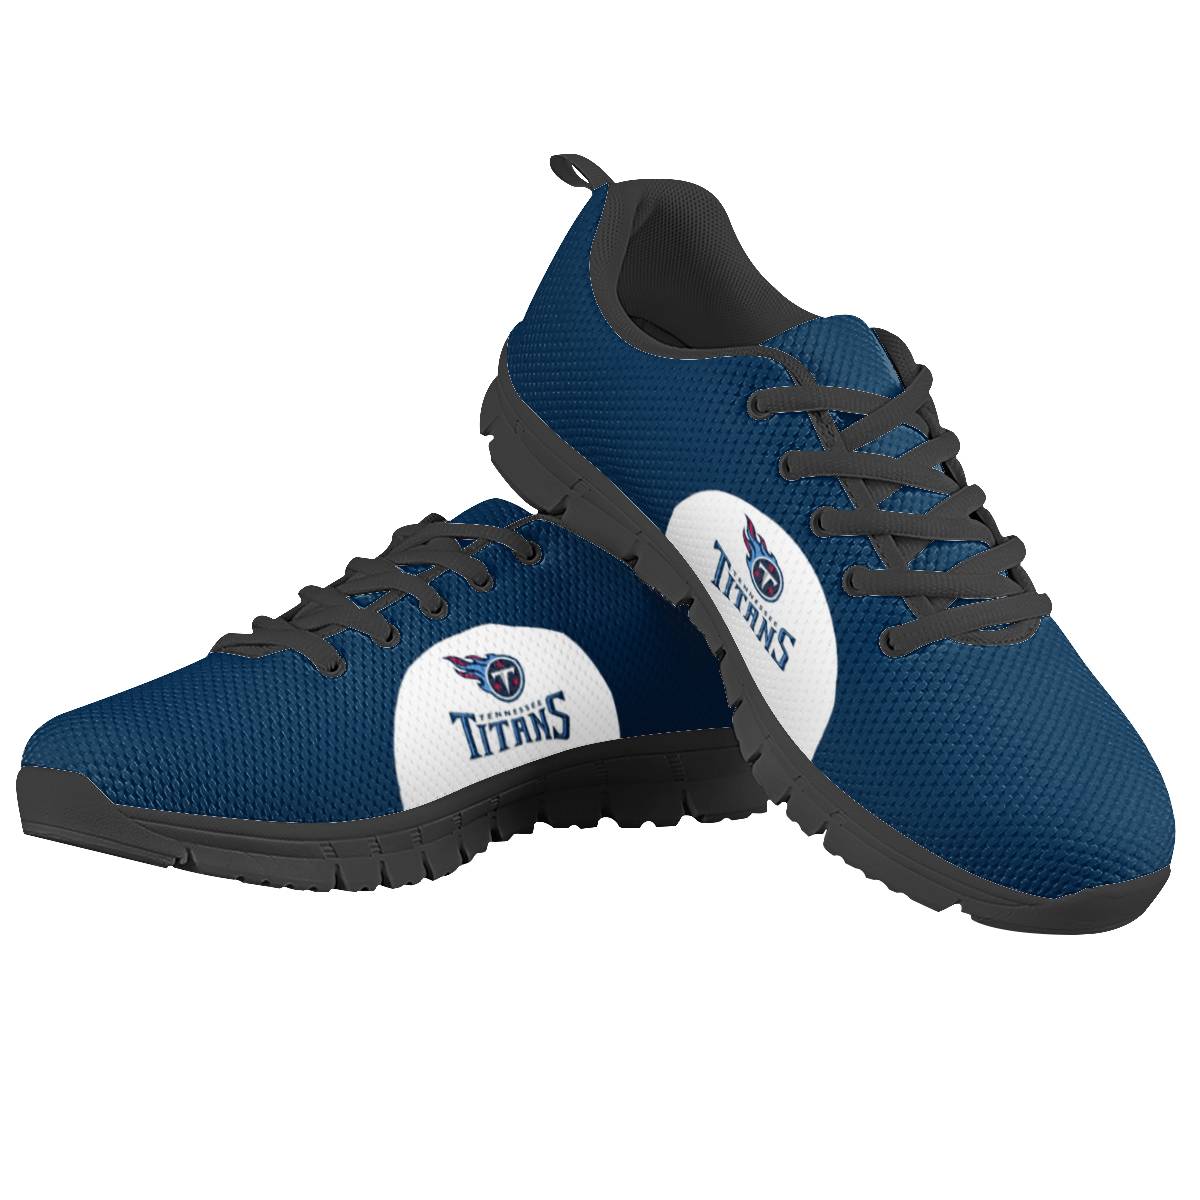 Women's Tennessee Titans AQ Running Shoes 002